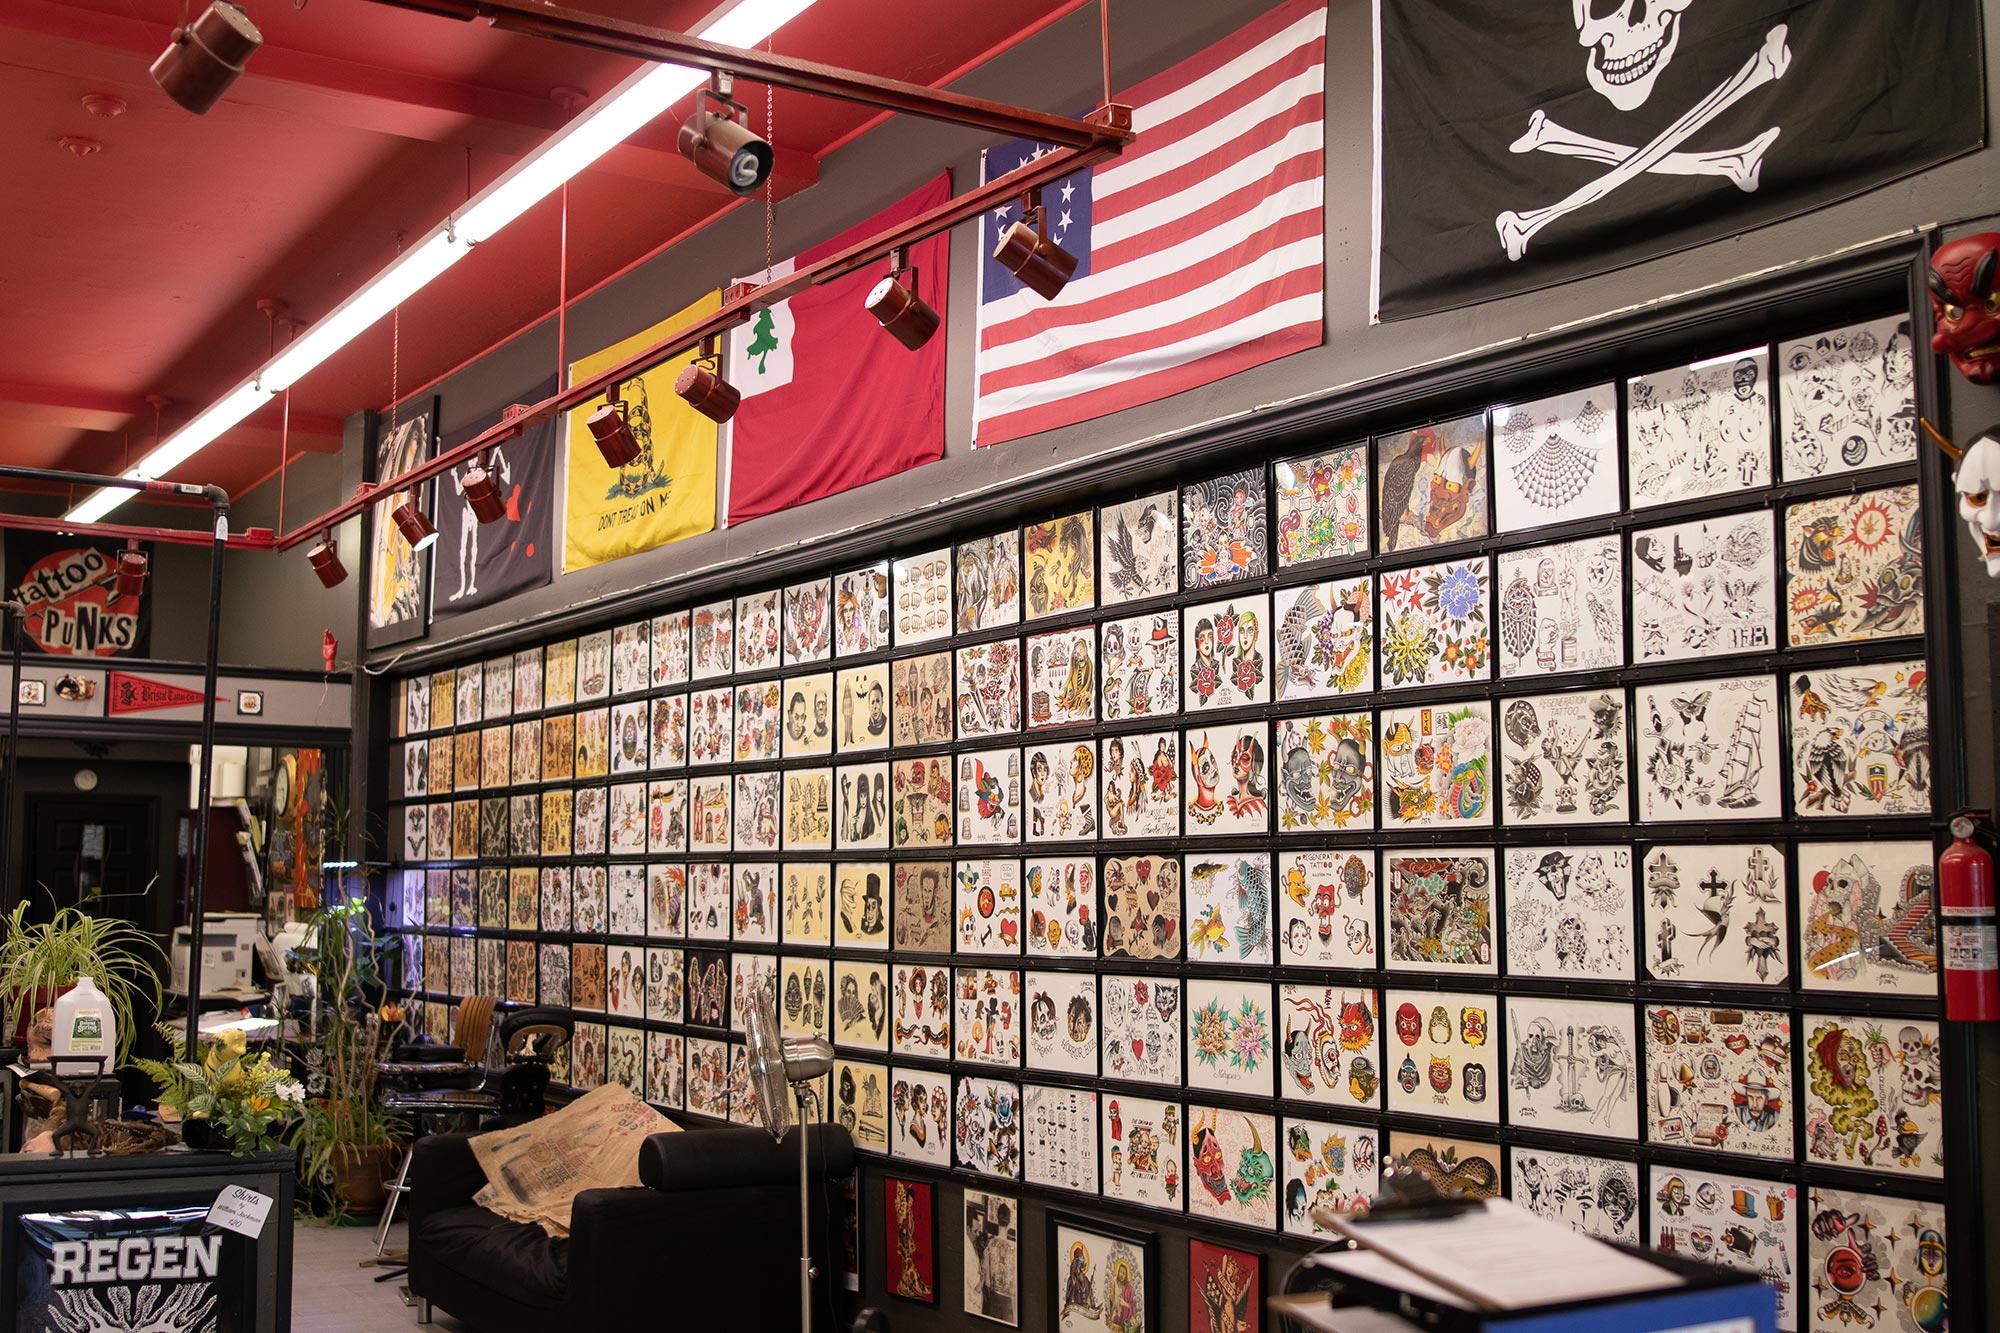 Interior view of Regeneration Tattoo shop in Allston, MA showing the various tattoo designs displayed on the wall.